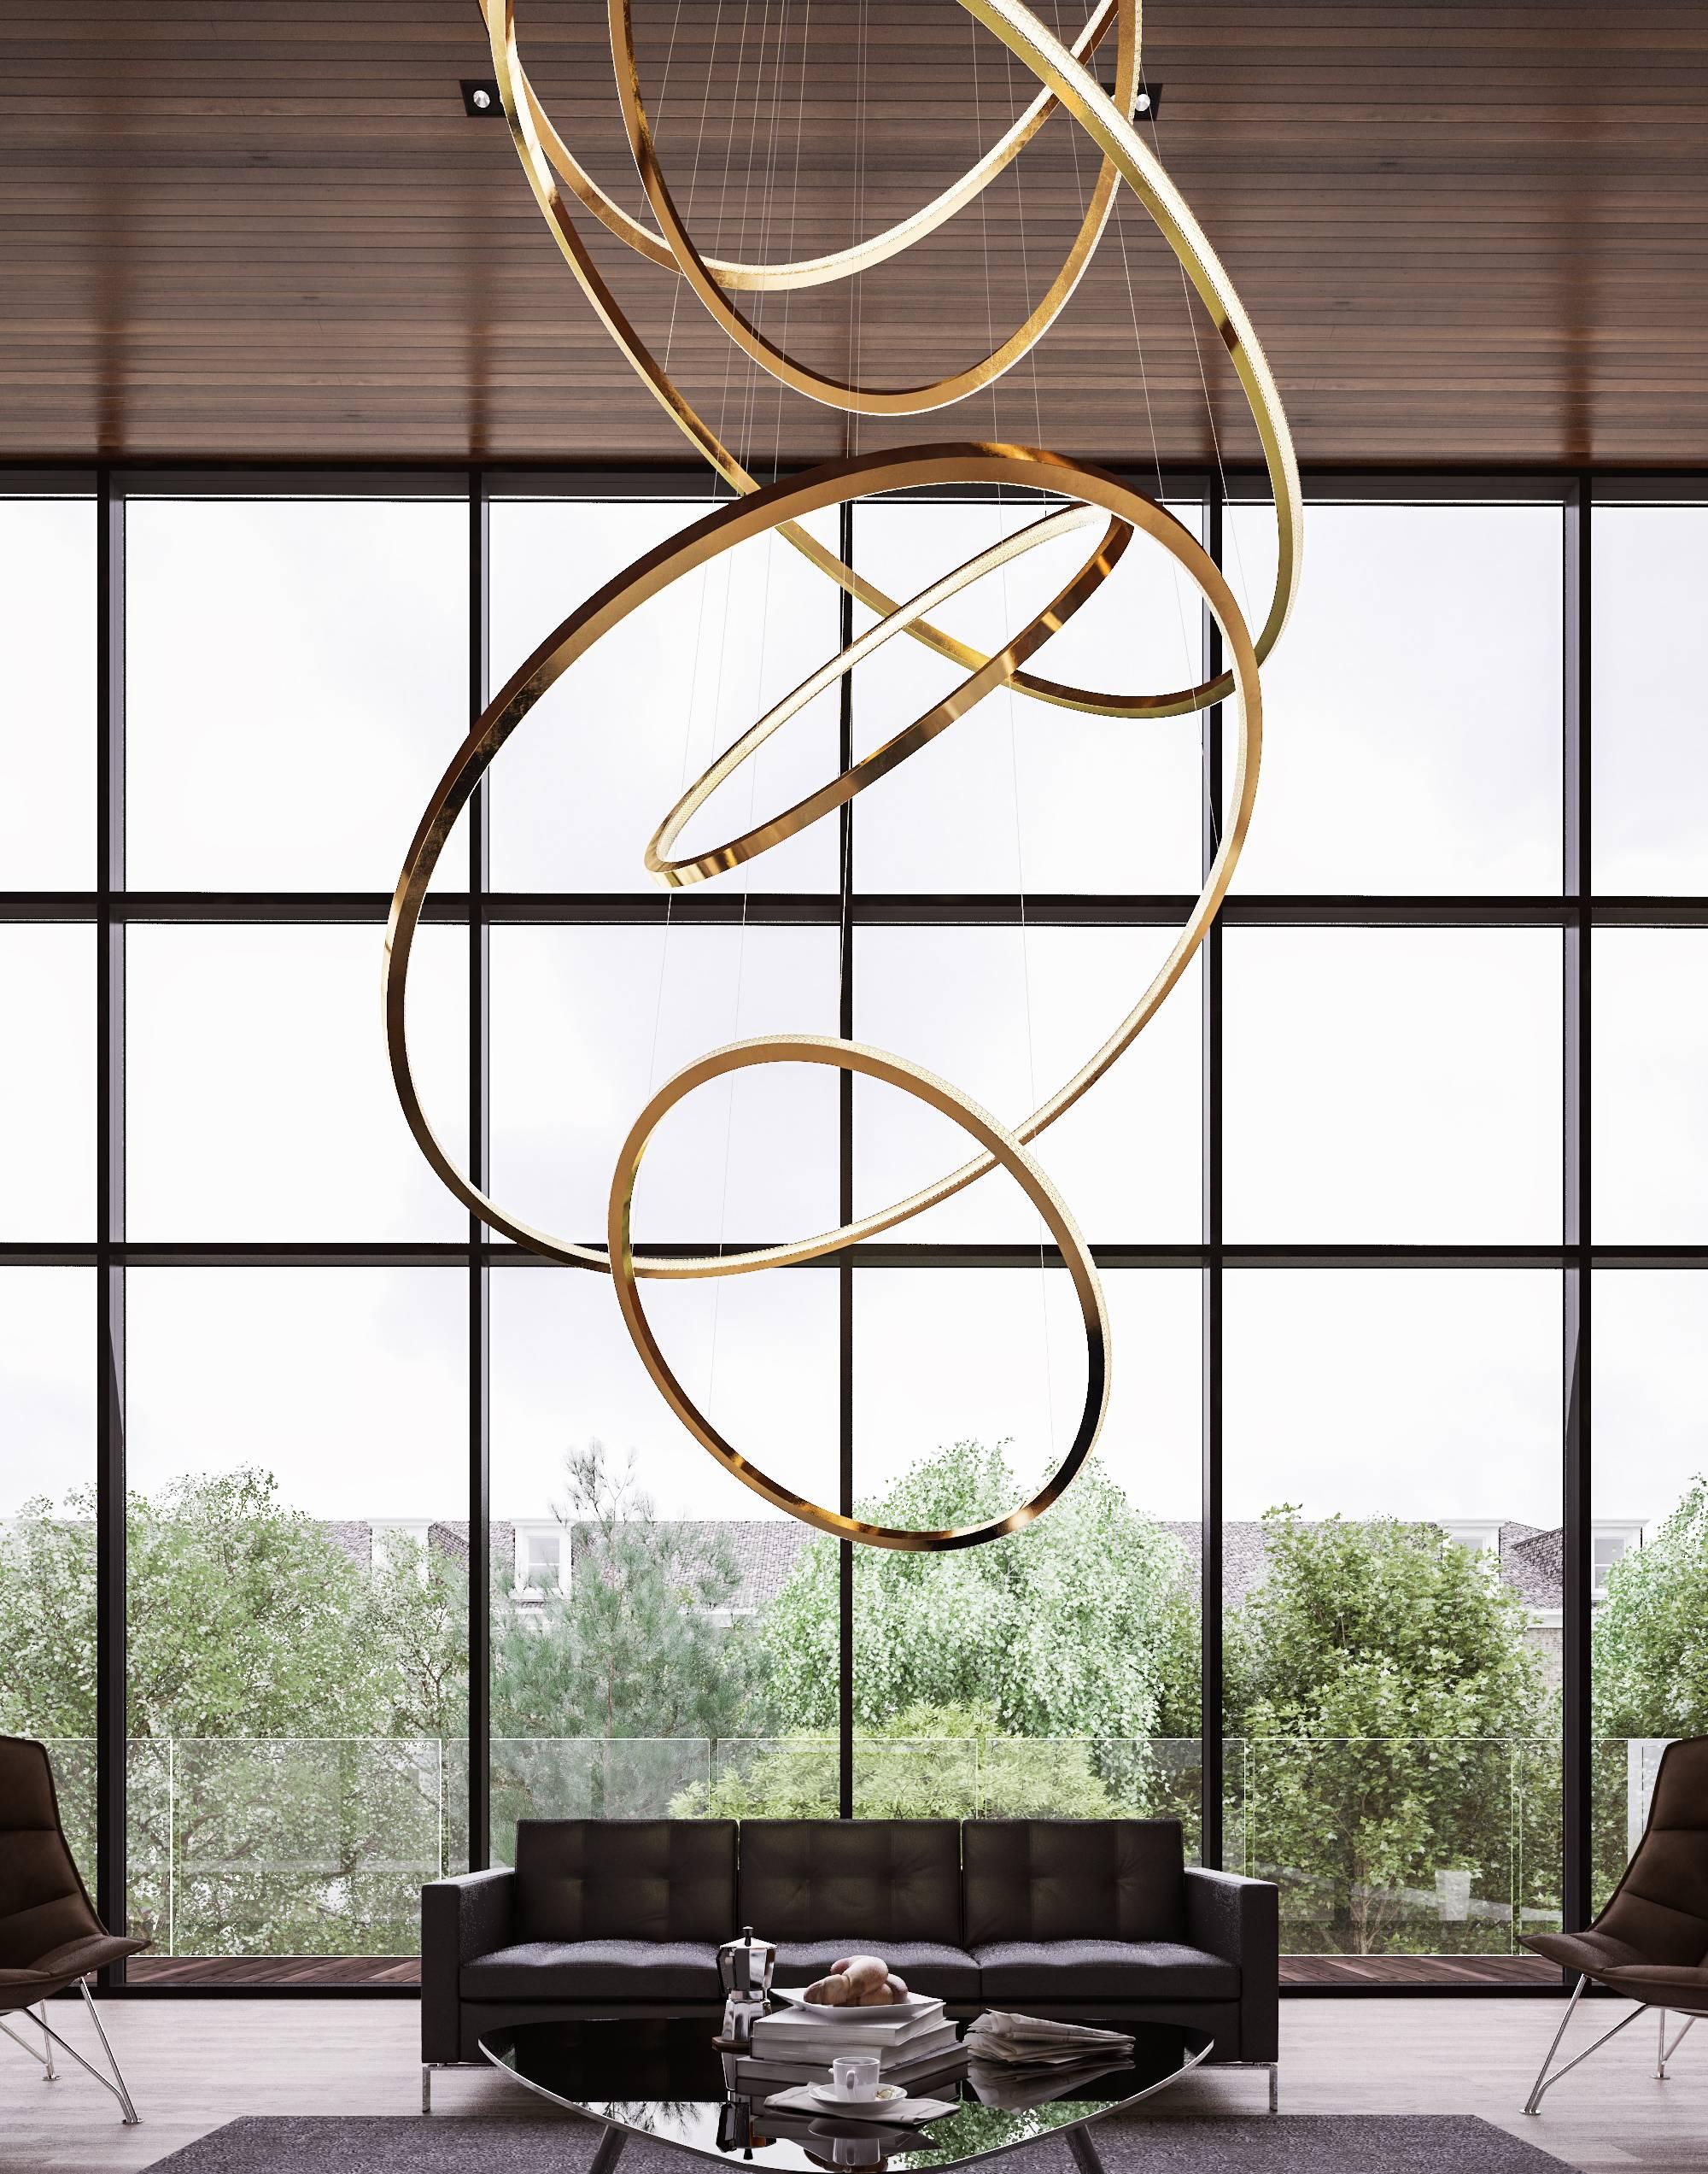 This contemporary chandelier is inspired by the tranquil lakes of Lohja, Finland, to explore peace, breath and balance. The Lohja brings clarity to high-ceiling rooms, large working areas and stairwells.

Handmade from our London workshop, the